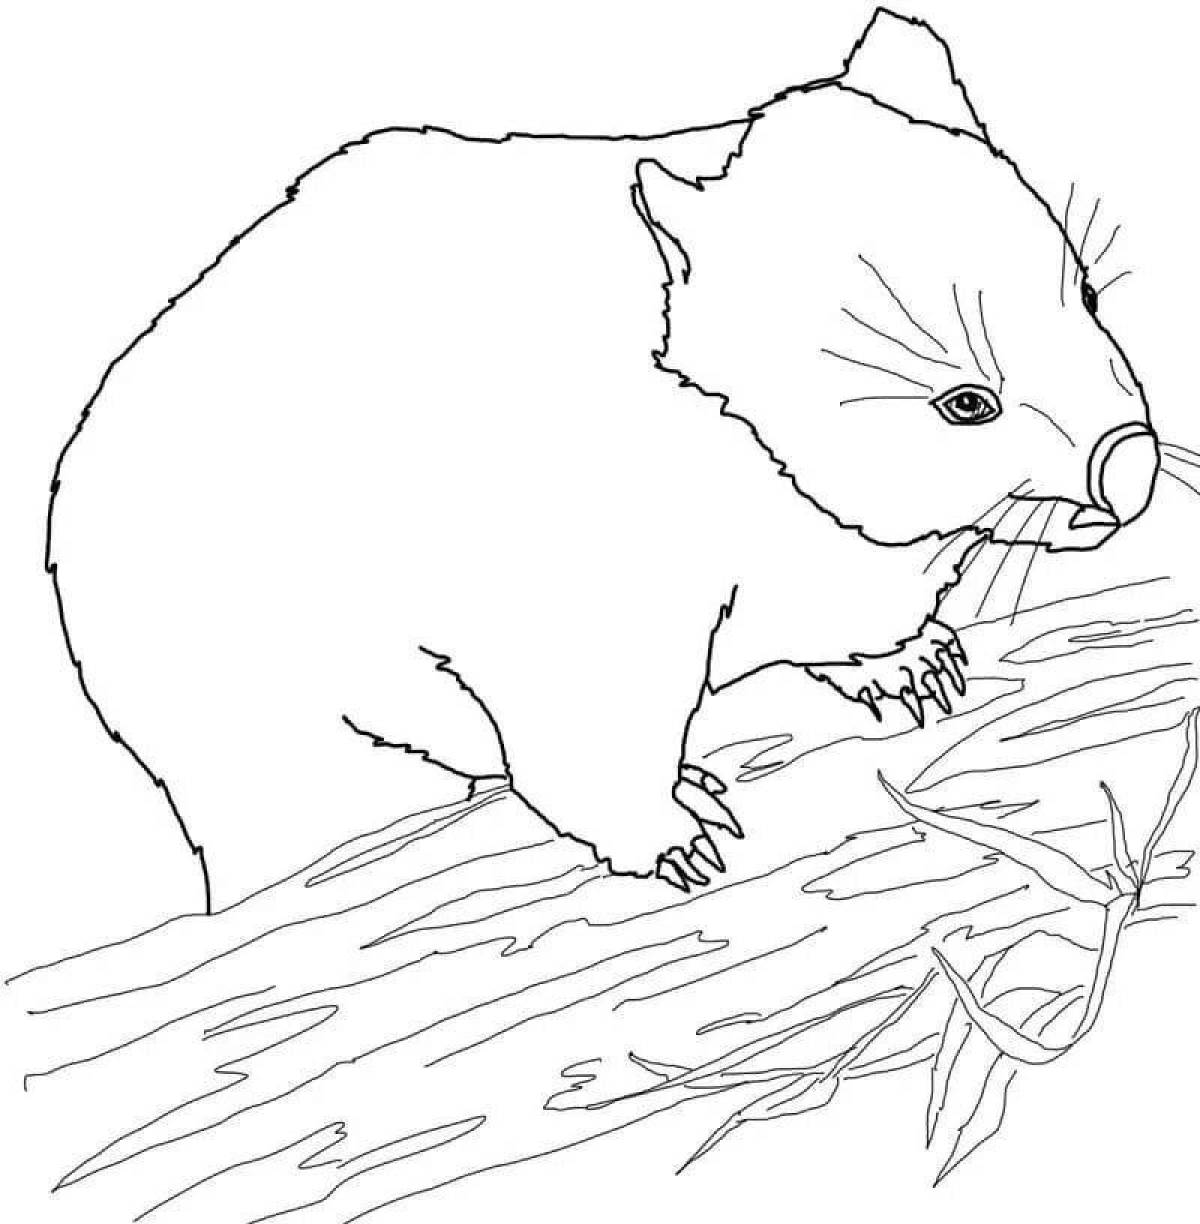 Colorful wombat coloring page